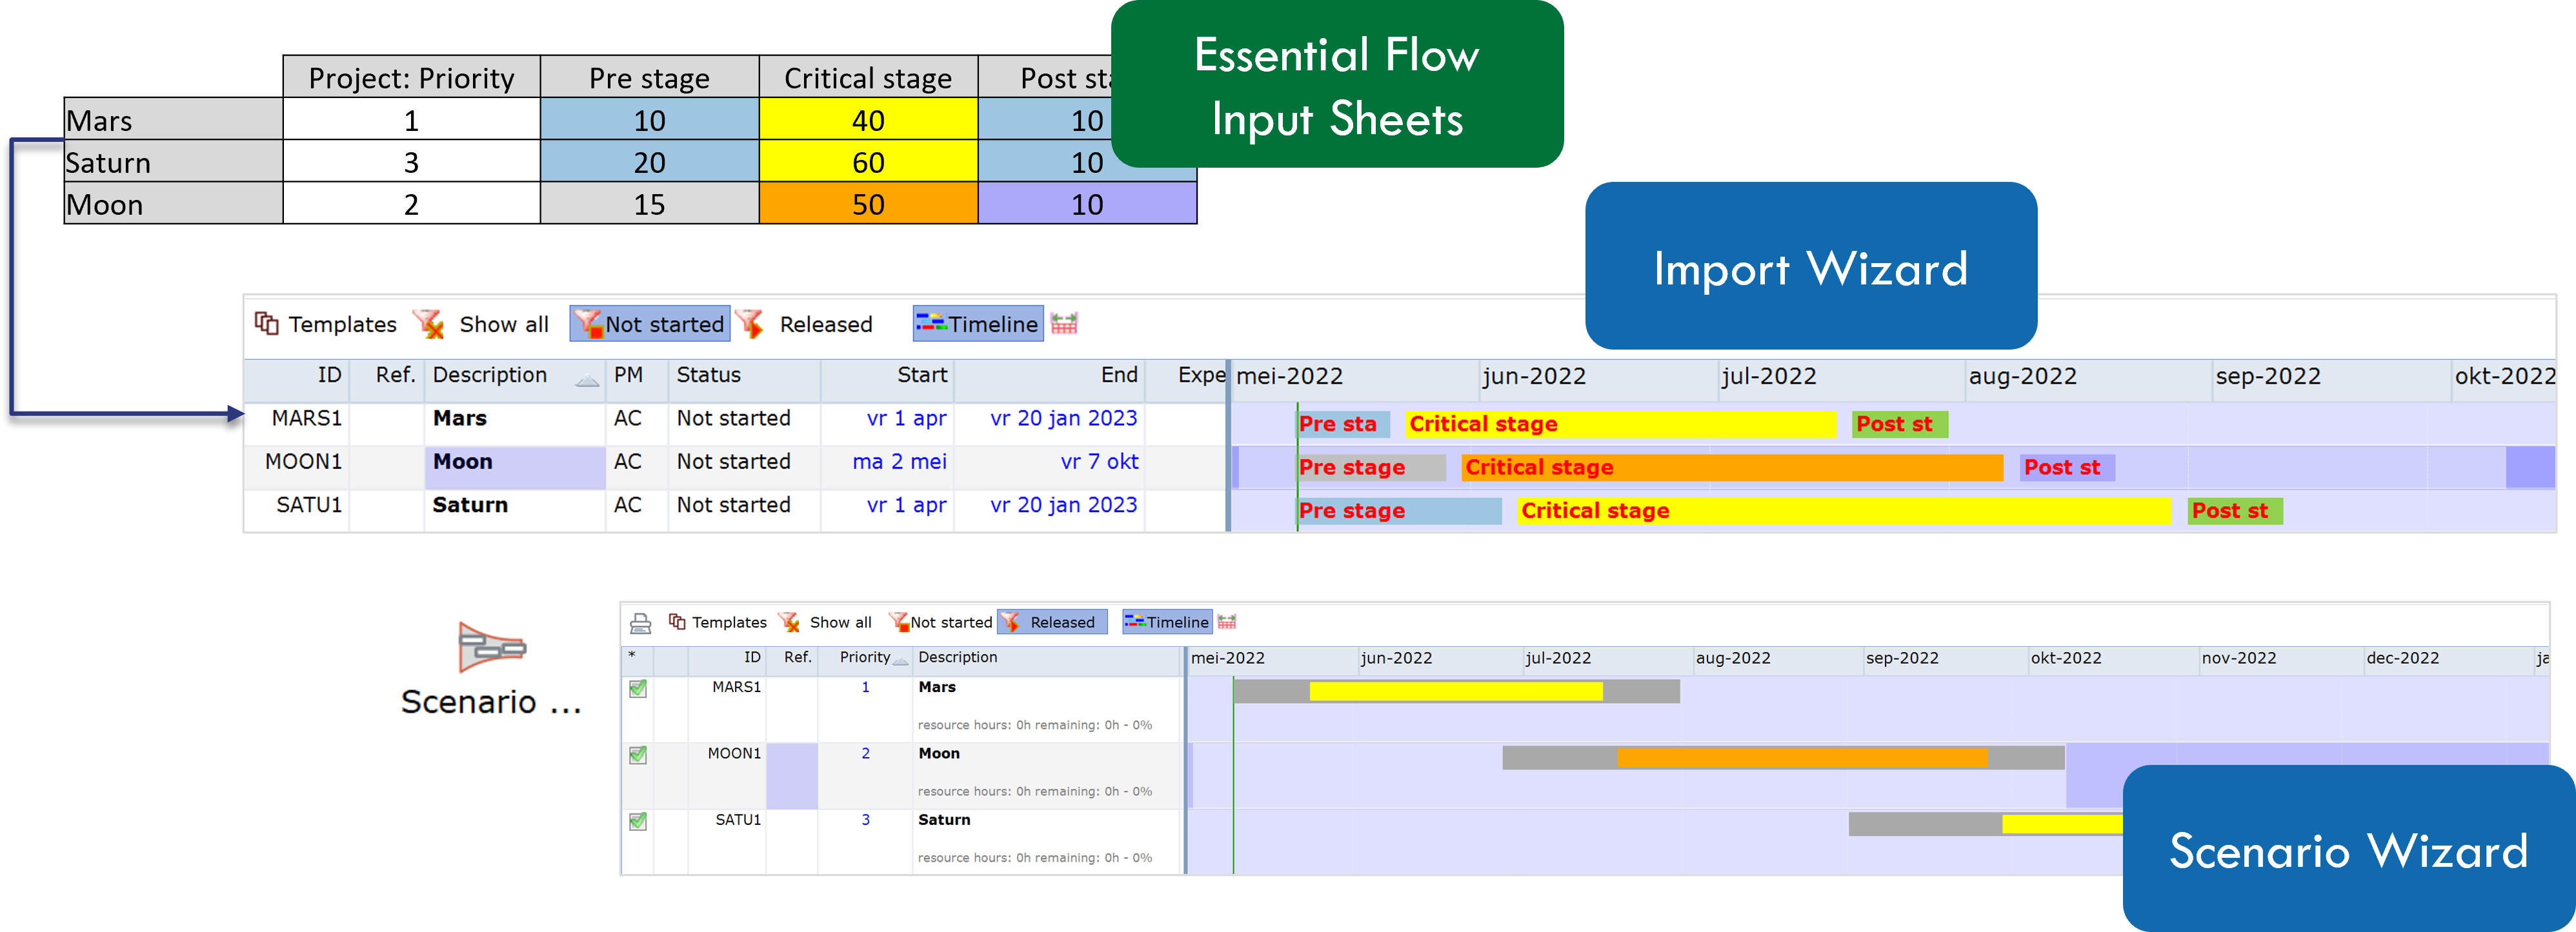 Essential_flow_high_level_process_flow.png